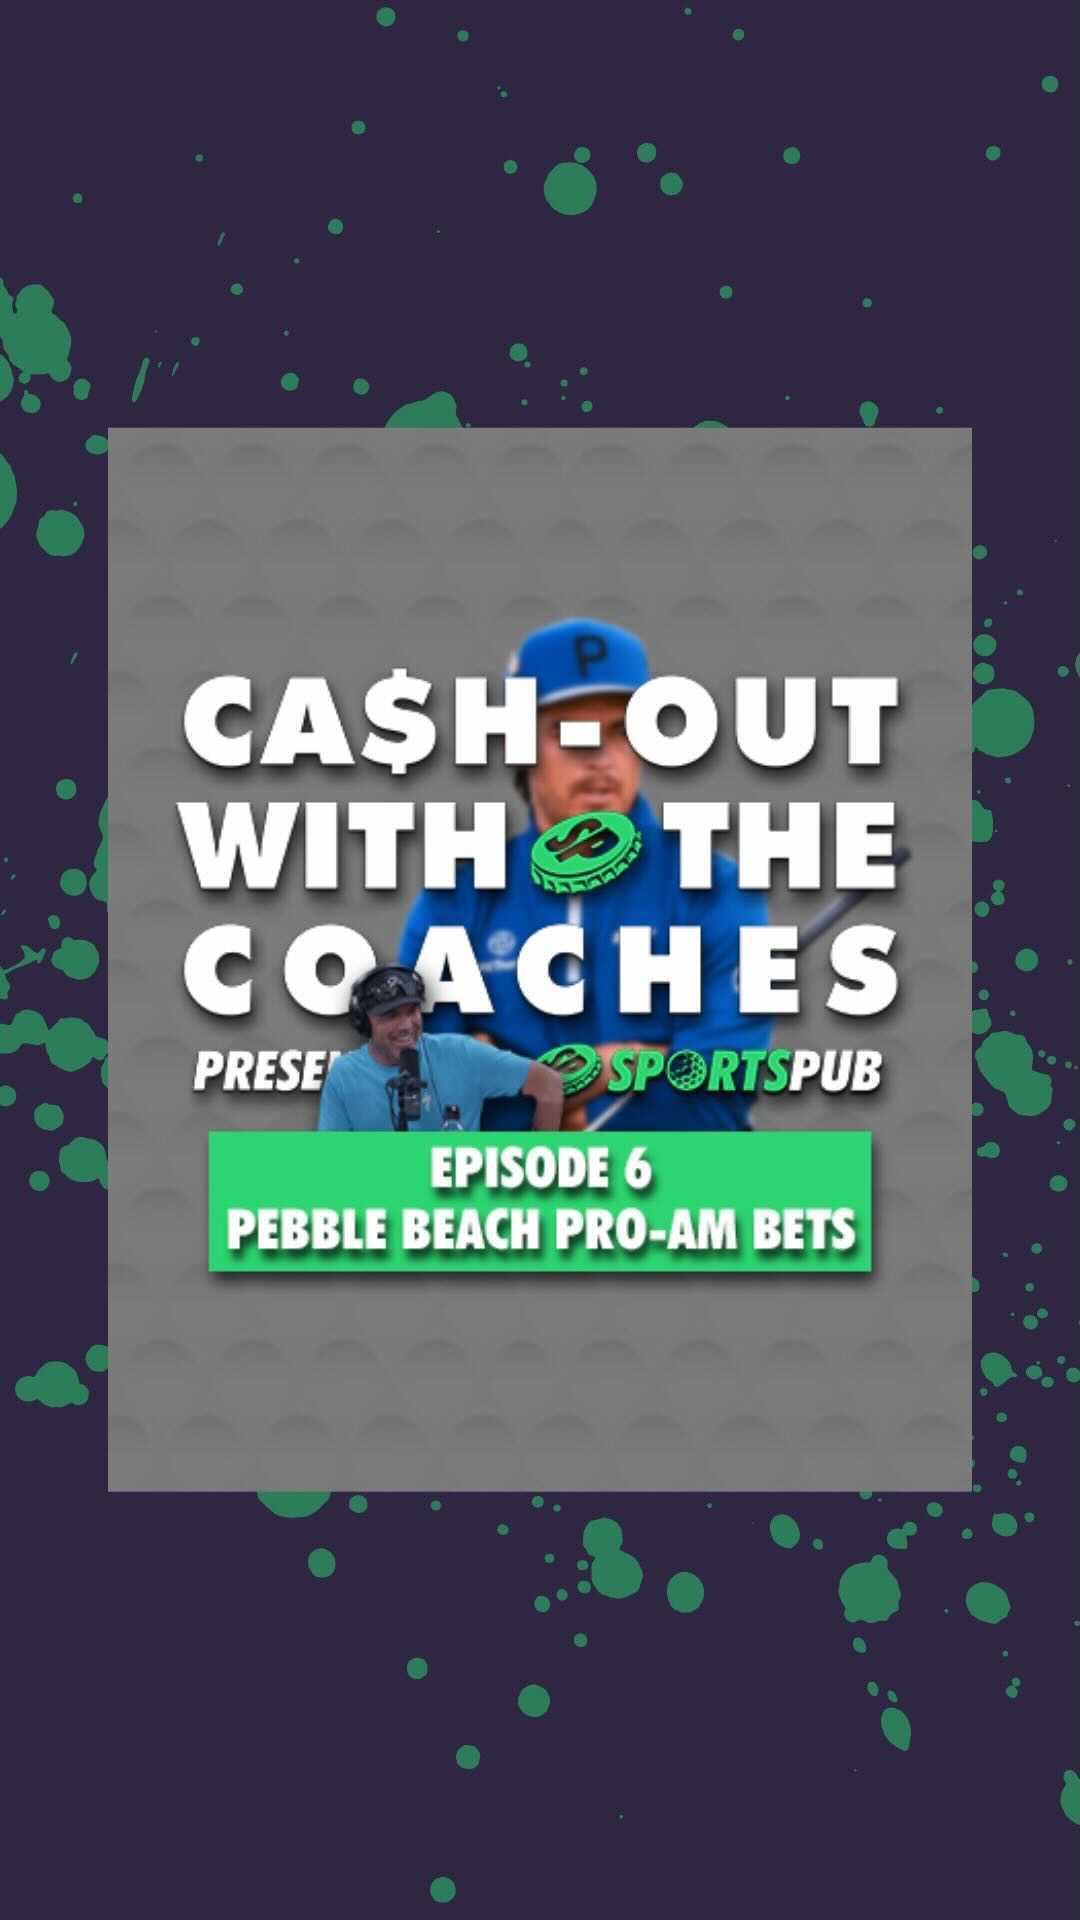 Cash-out with the Coaches AT&T Pebble Beach Pro-Am 2021